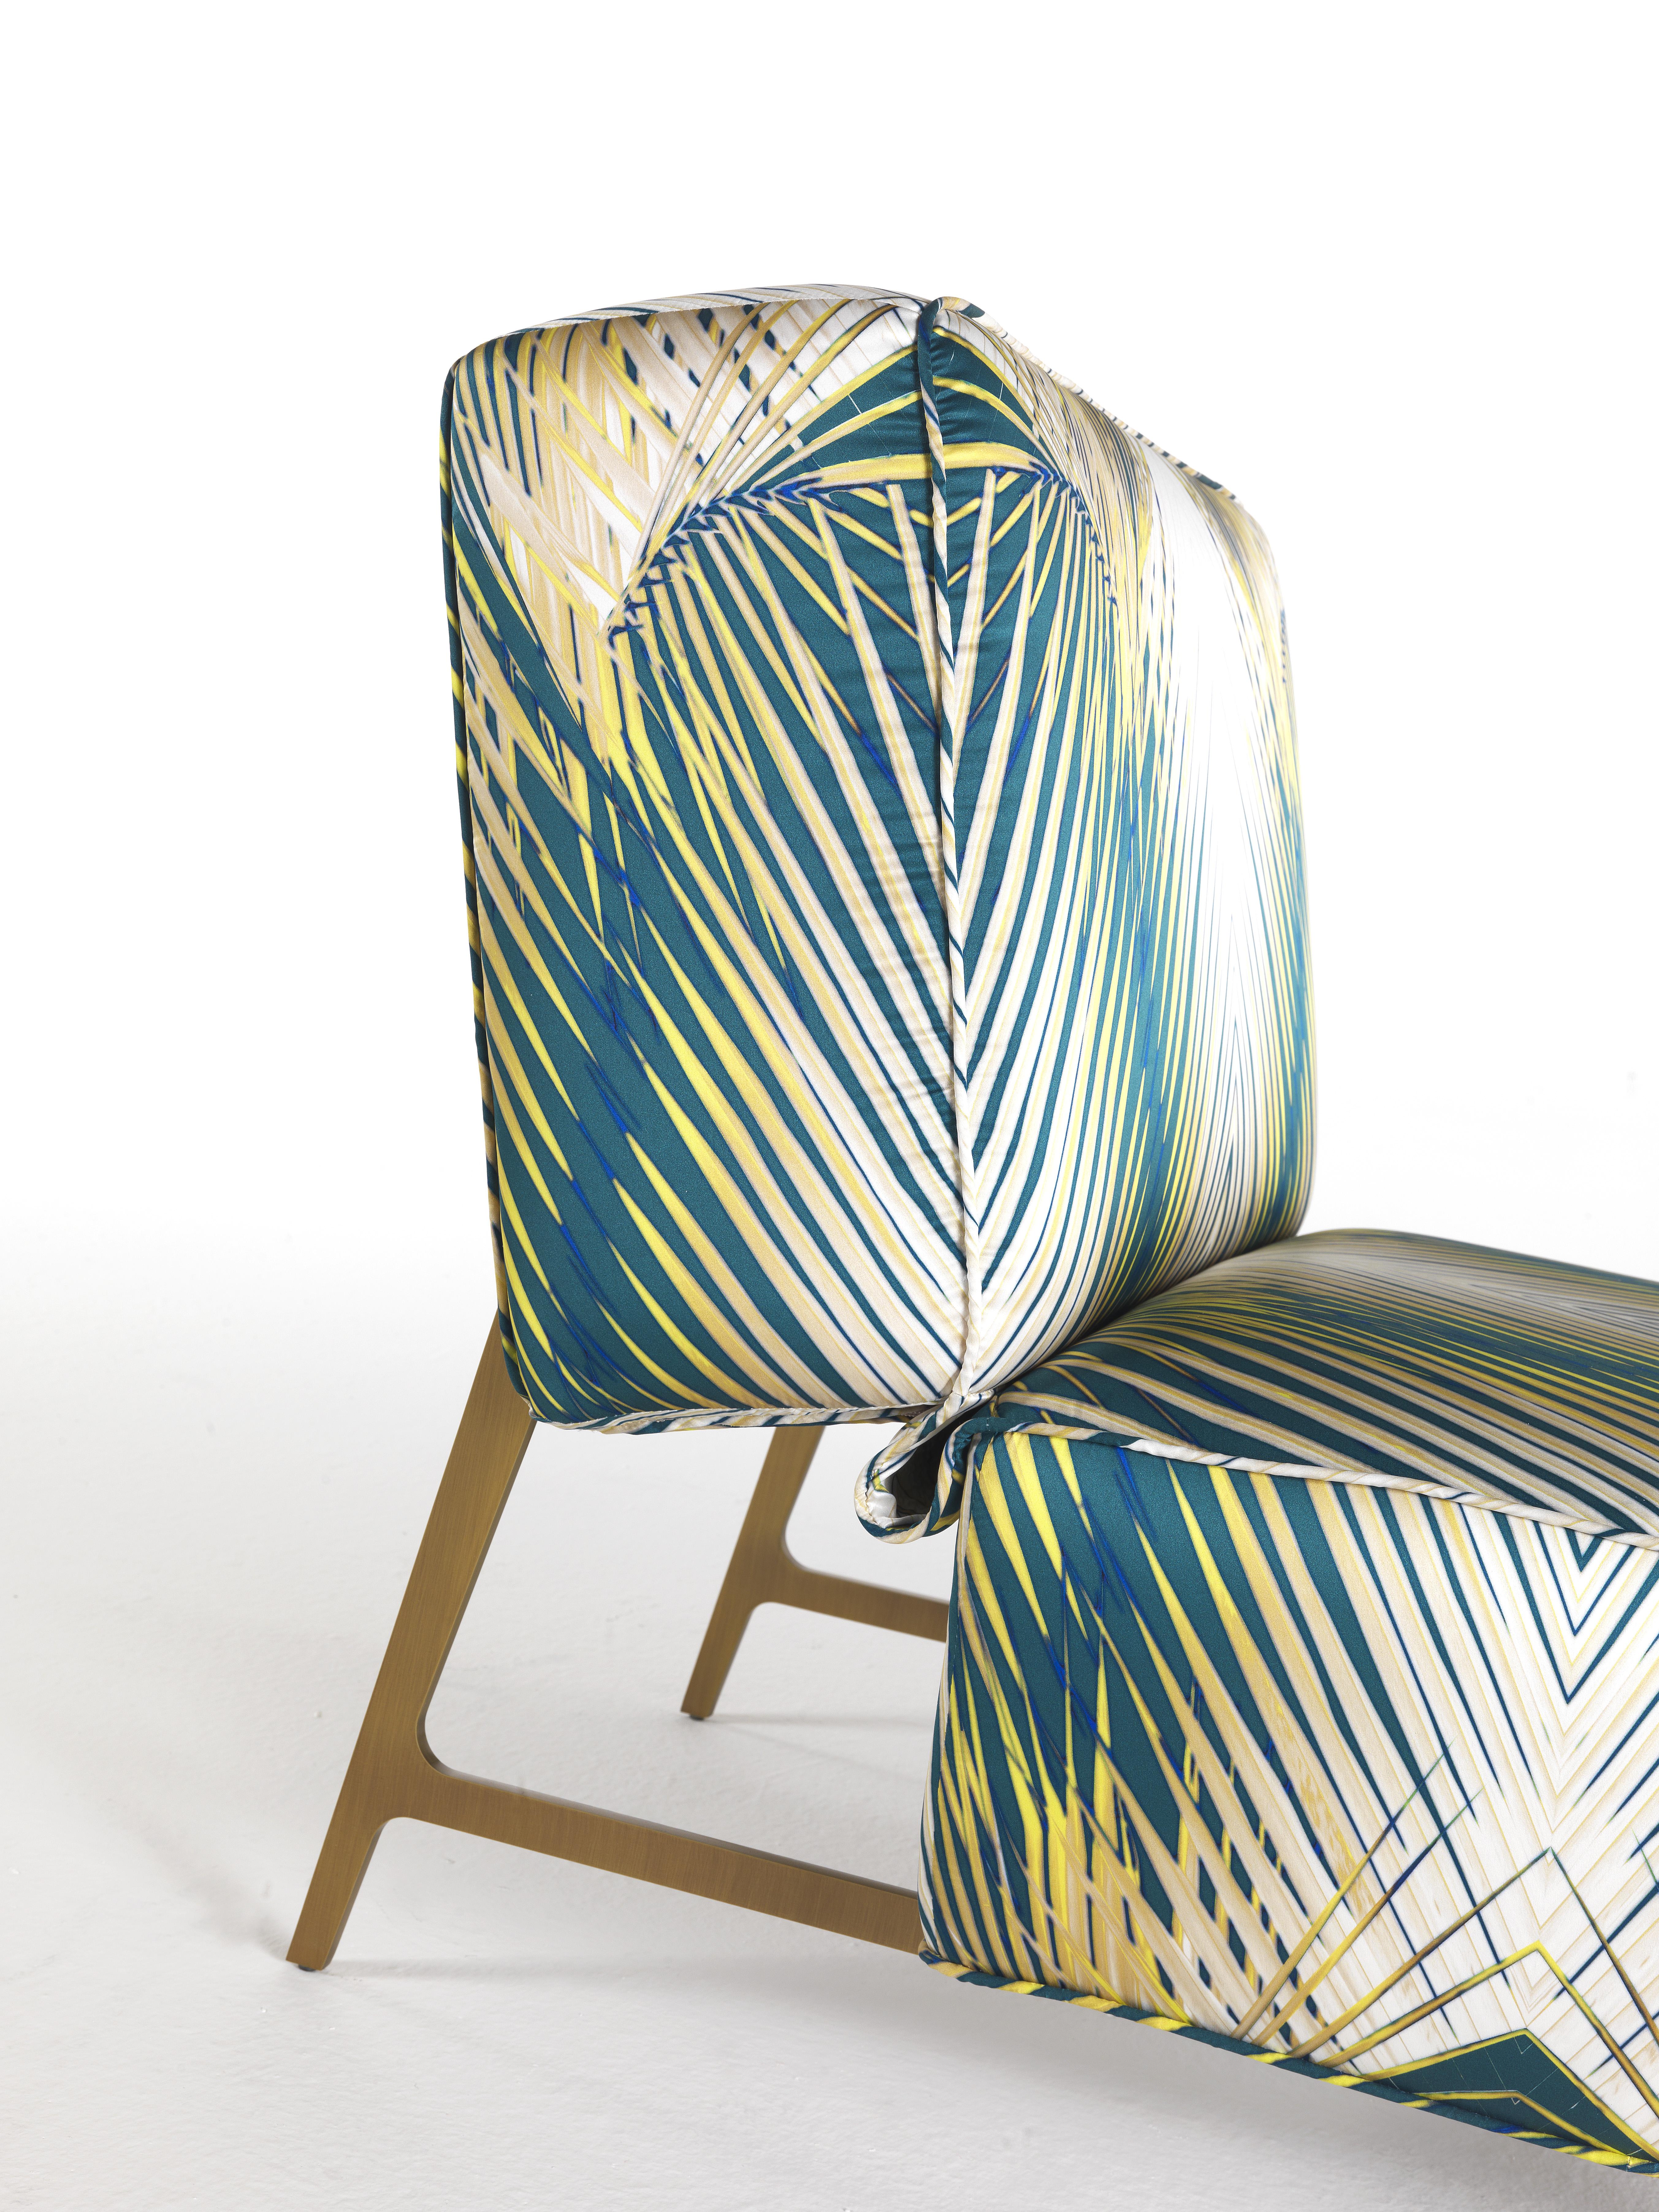 Contemporary 21st Century Davis Armchair in Fabric by Roberto Cavalli Home Interiors For Sale